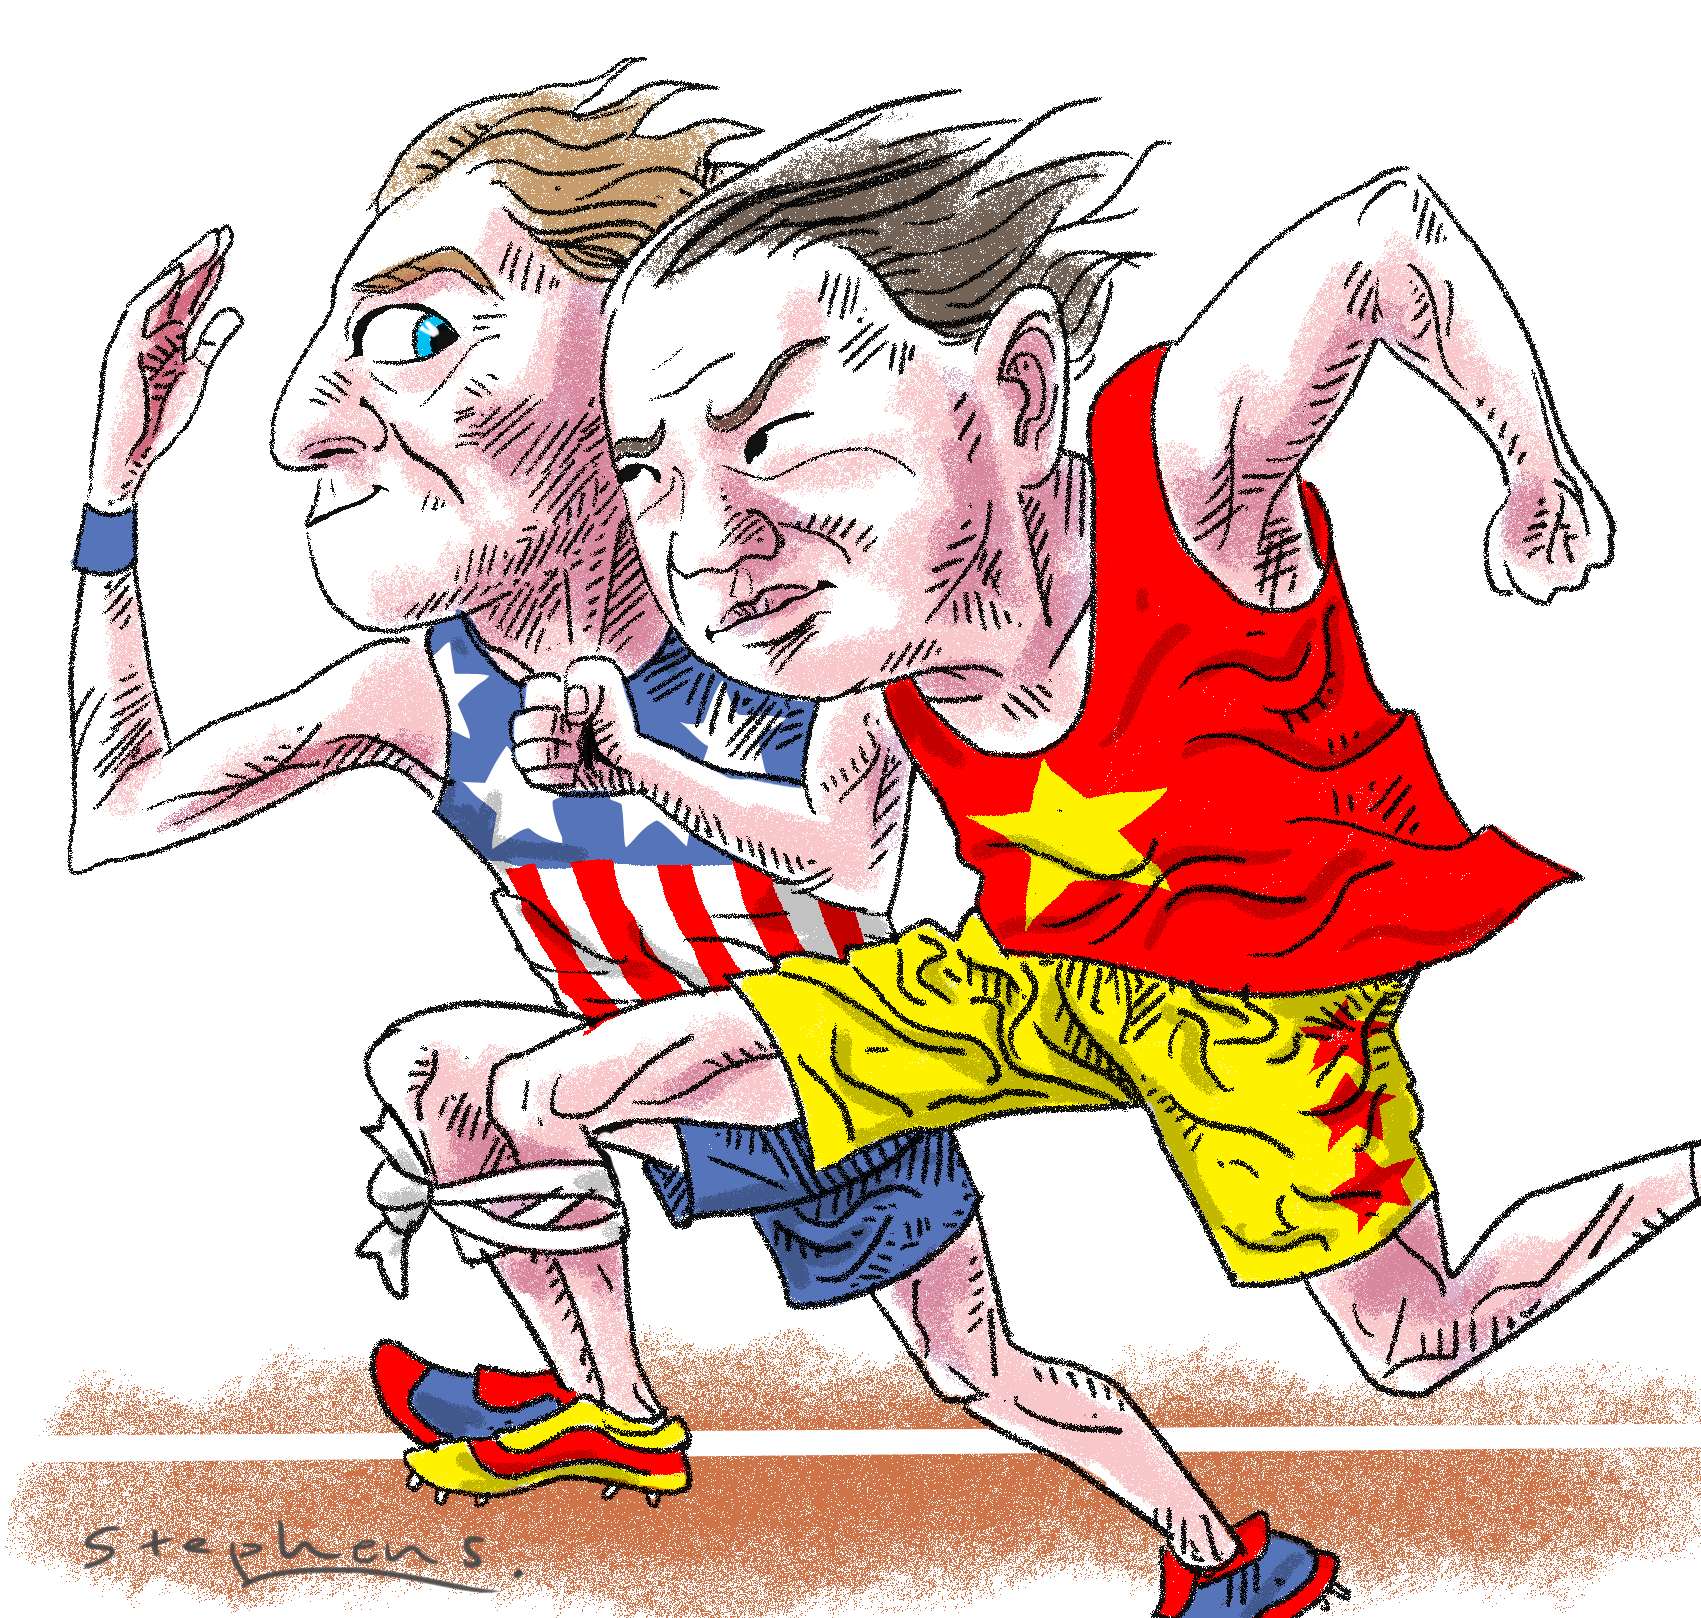 Wang Jisi says the Sino-US relationship has entered a new normal, with cooperation and competition both increasing, leading to a repeated pattern of escalation and de-escalation of tensions